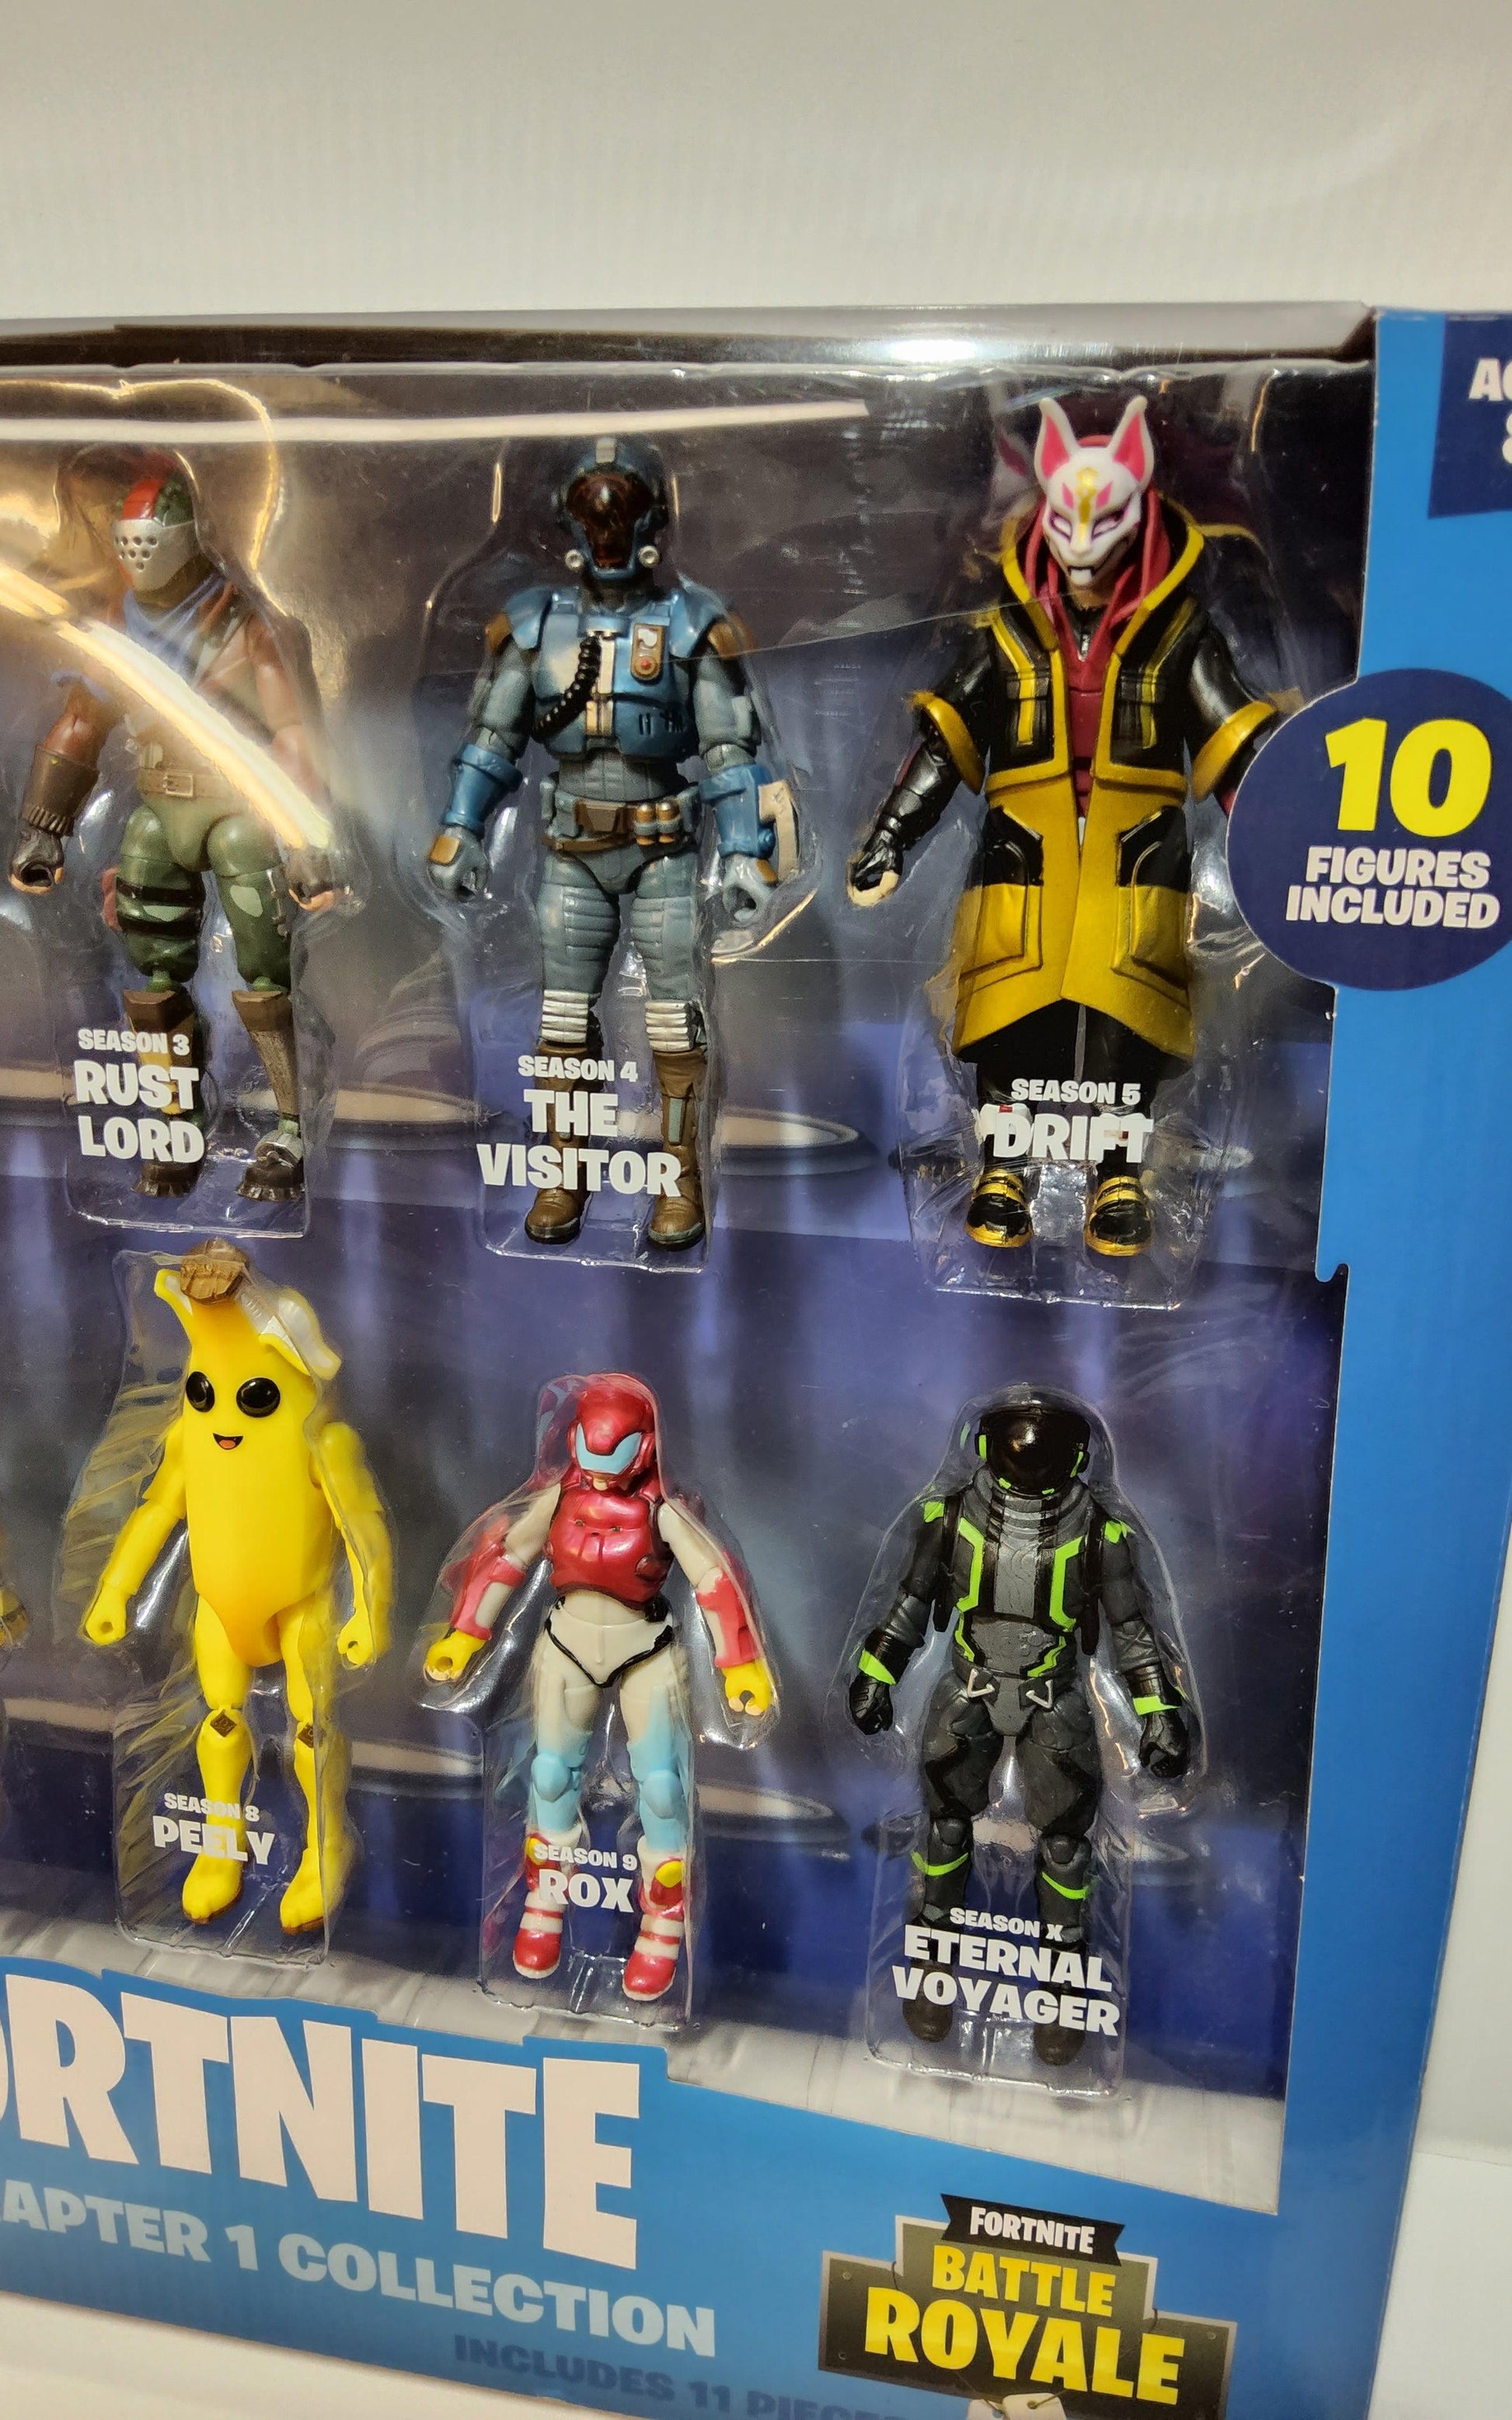 Fortnite 10 Figure Ch 1 Collection Battle Royale Set Drift, Peely, Rox & More - Logan's Toy Chest